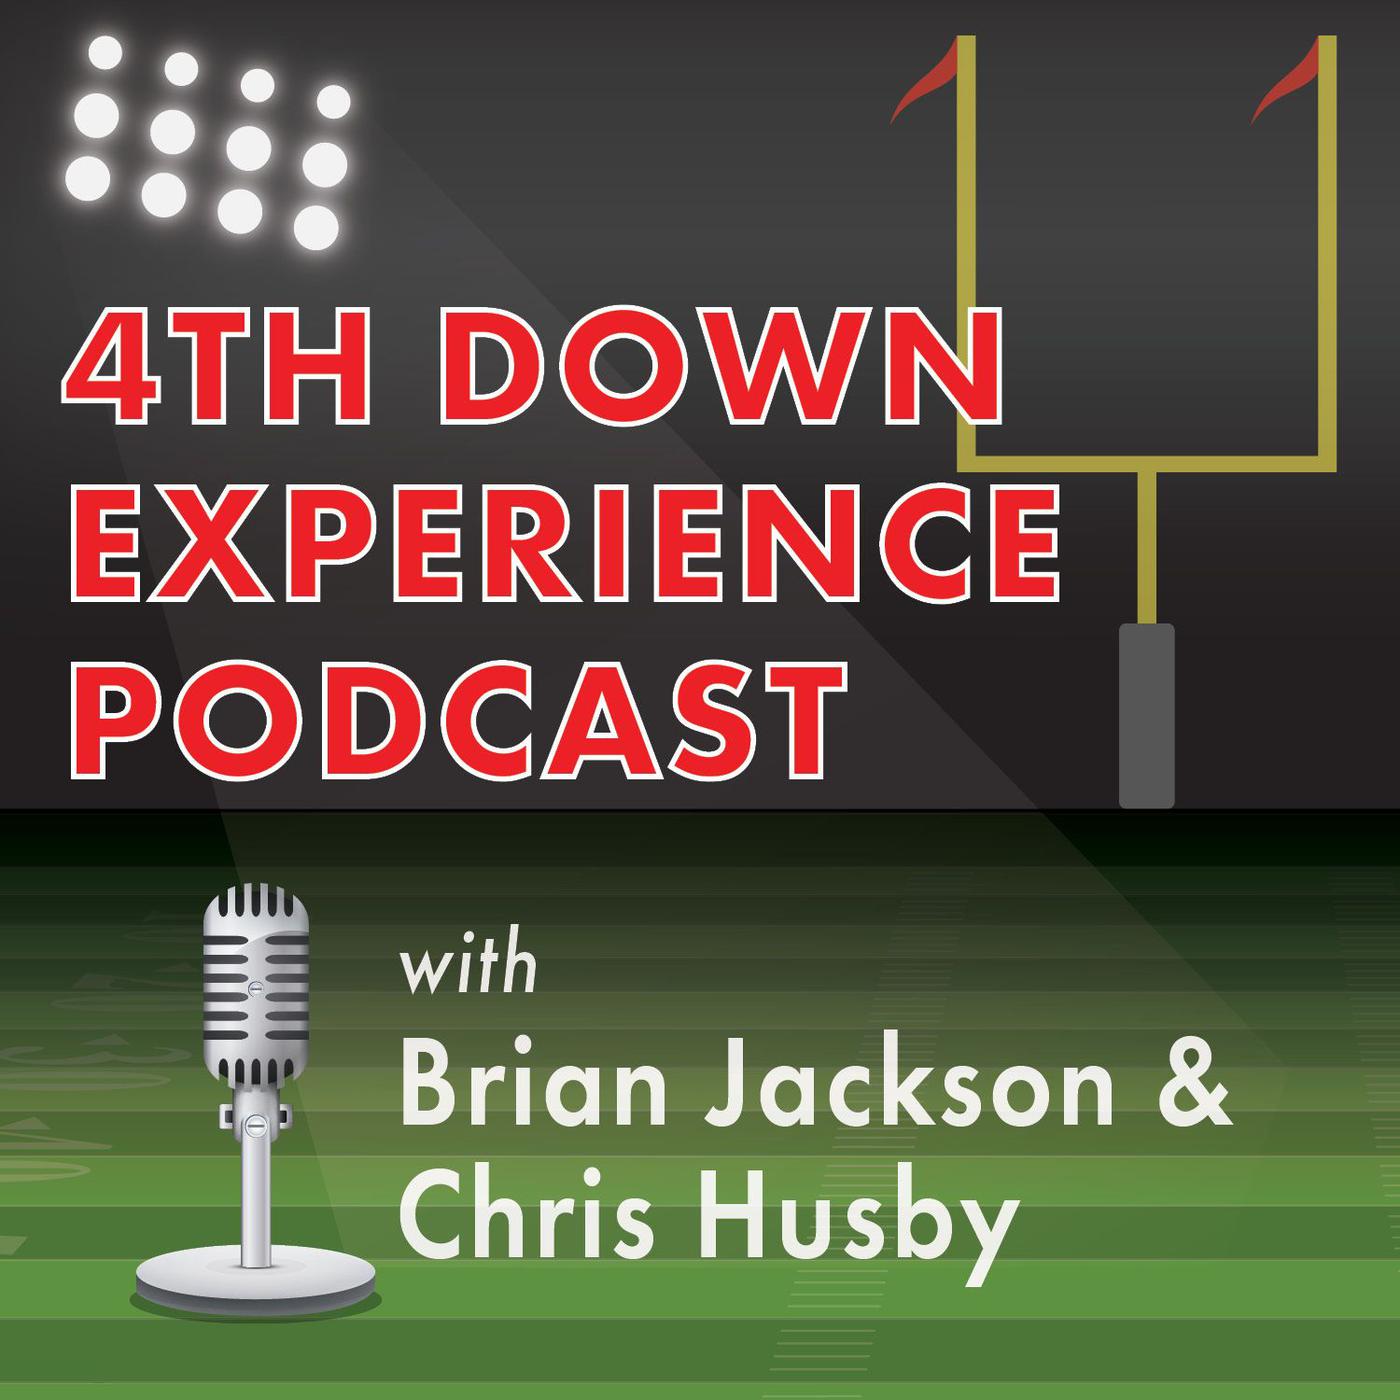 New Cleveland Browns Kicker, Greg Joseph talks first NFL start | 4th Down Experience Podcast | Ep 37